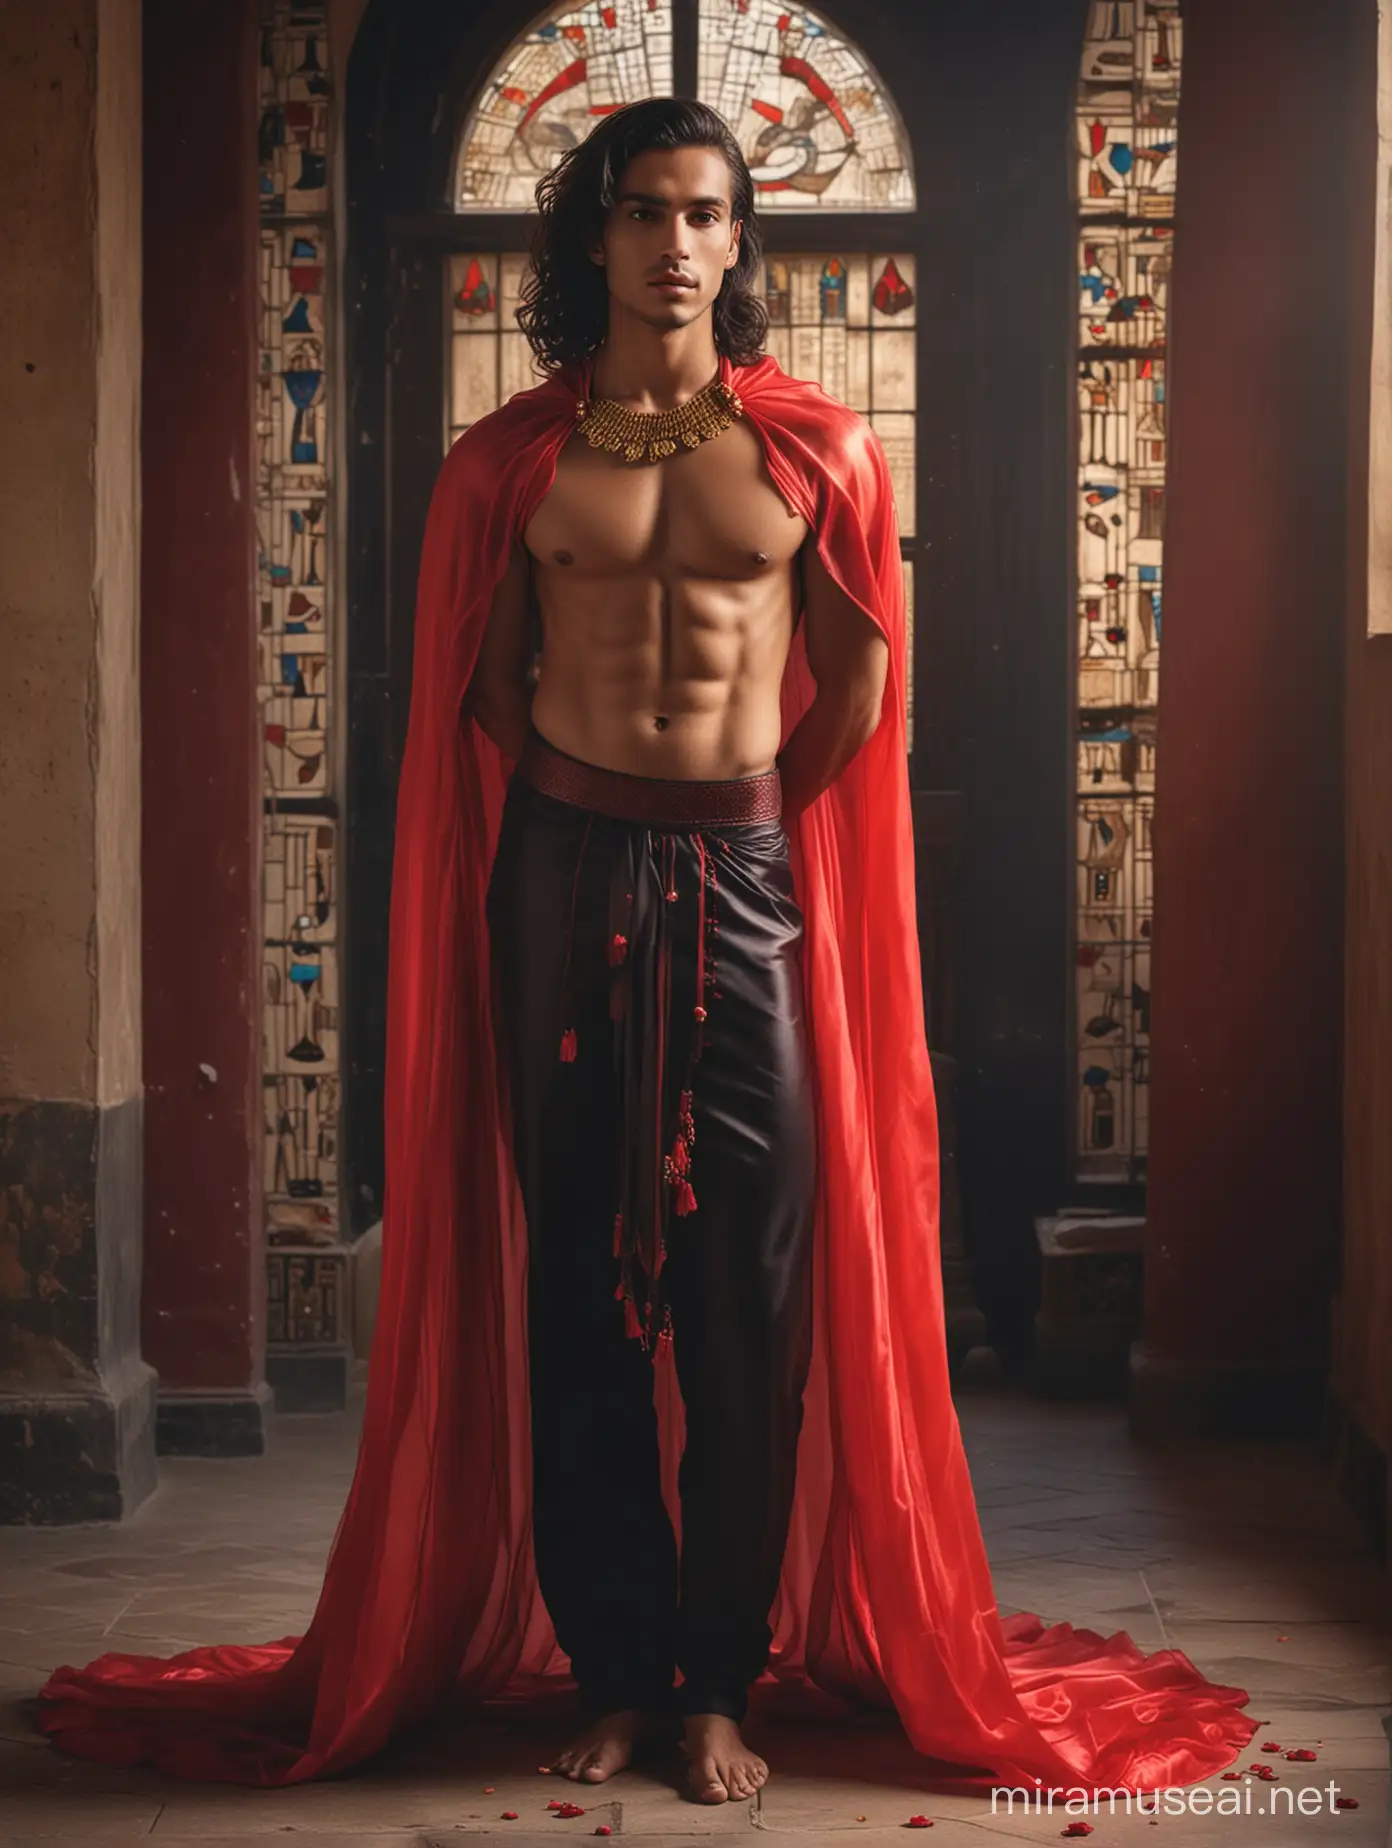 young attractive man male with tanned skin, an athletic build, a very long hair length to waist 65 cm black-wine colored hair with red ends in a revealing translucent red outfit  red milking organza cape in the ancient Egyptian style made of eggplant-colored organza, hands in pockets, standing in a rich room in black and red tones, huge windows in the air, golden radiance in vases, red flowers, face, full face, waist-length portrait fantasy style acent Egypt style 8K detail, 8K quality face full face waist-length portrait 